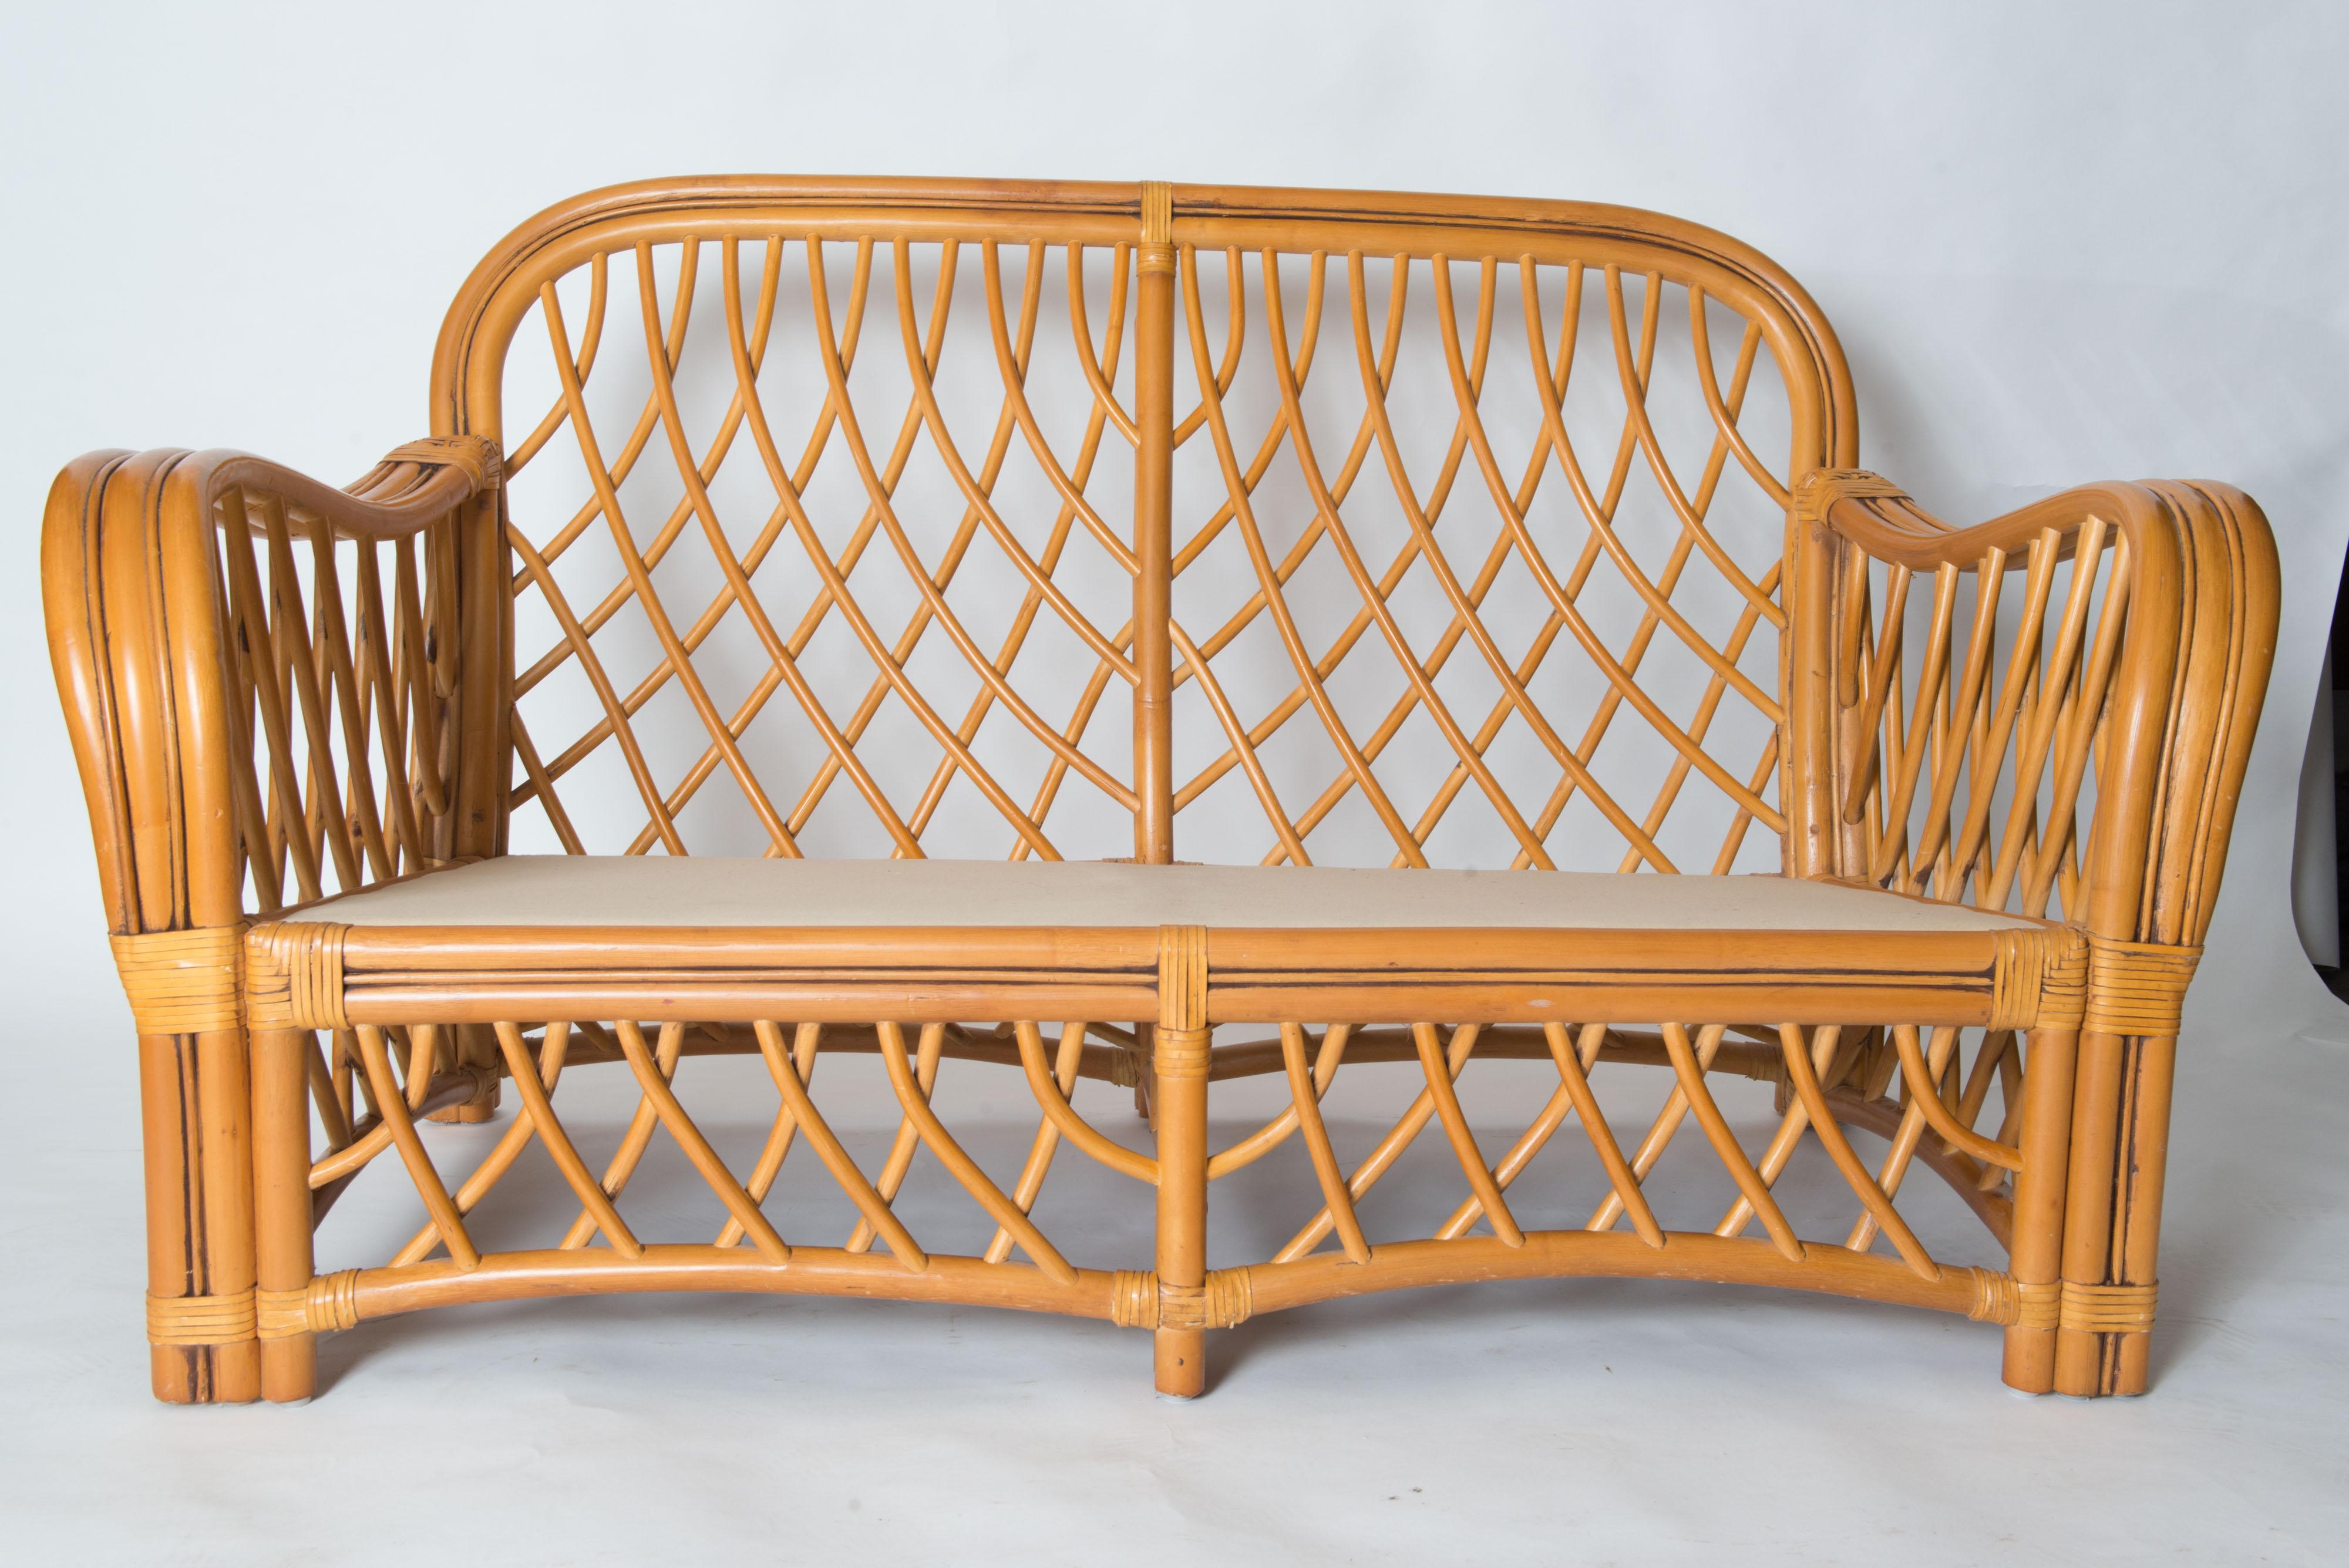 Midcentury Italian Organic Modern Rattan Loveseat In Good Condition For Sale In Stamford, CT